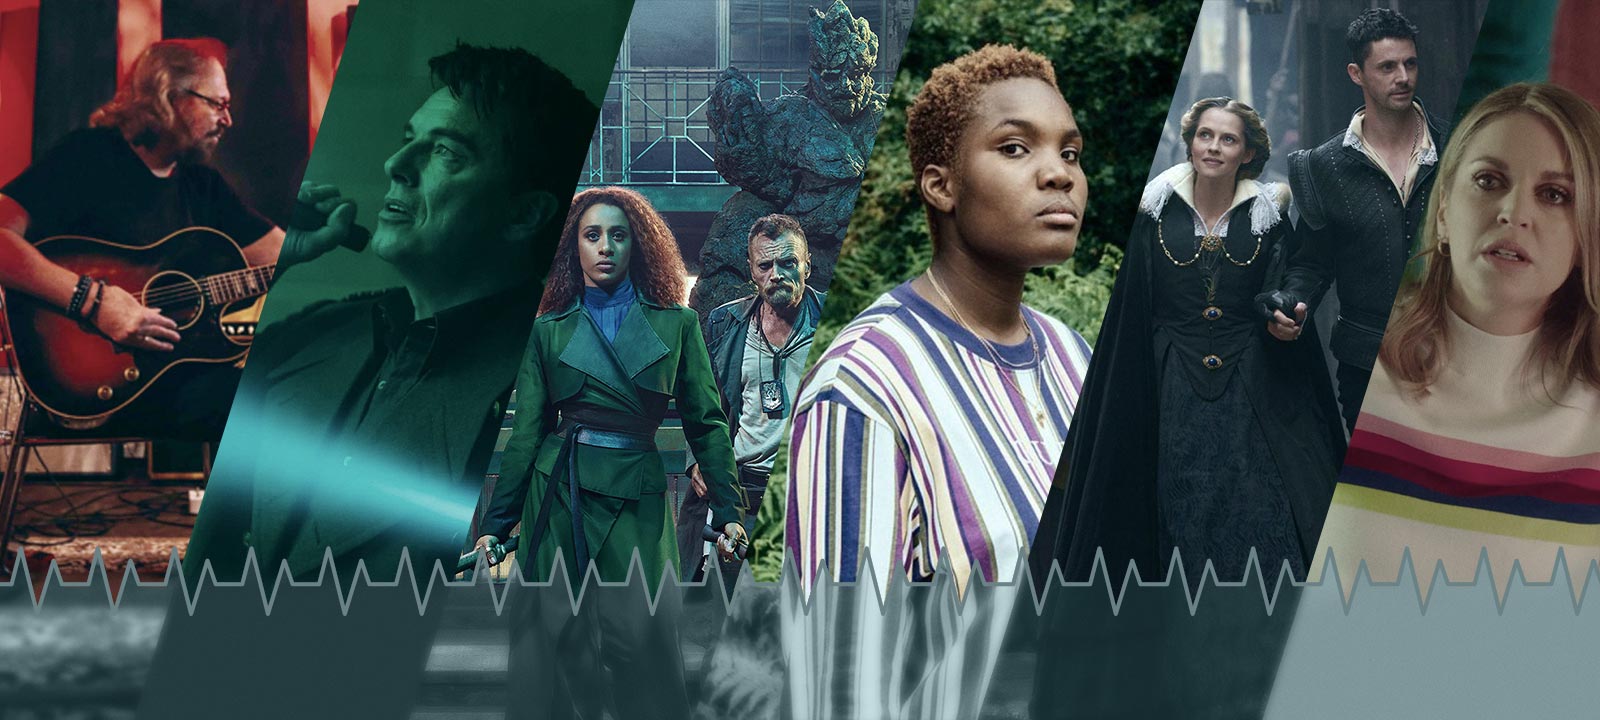 Pop Culture Pulse: From a 'Doctor Who' Festive Adventure to New Fantasy Series 'The Watch'